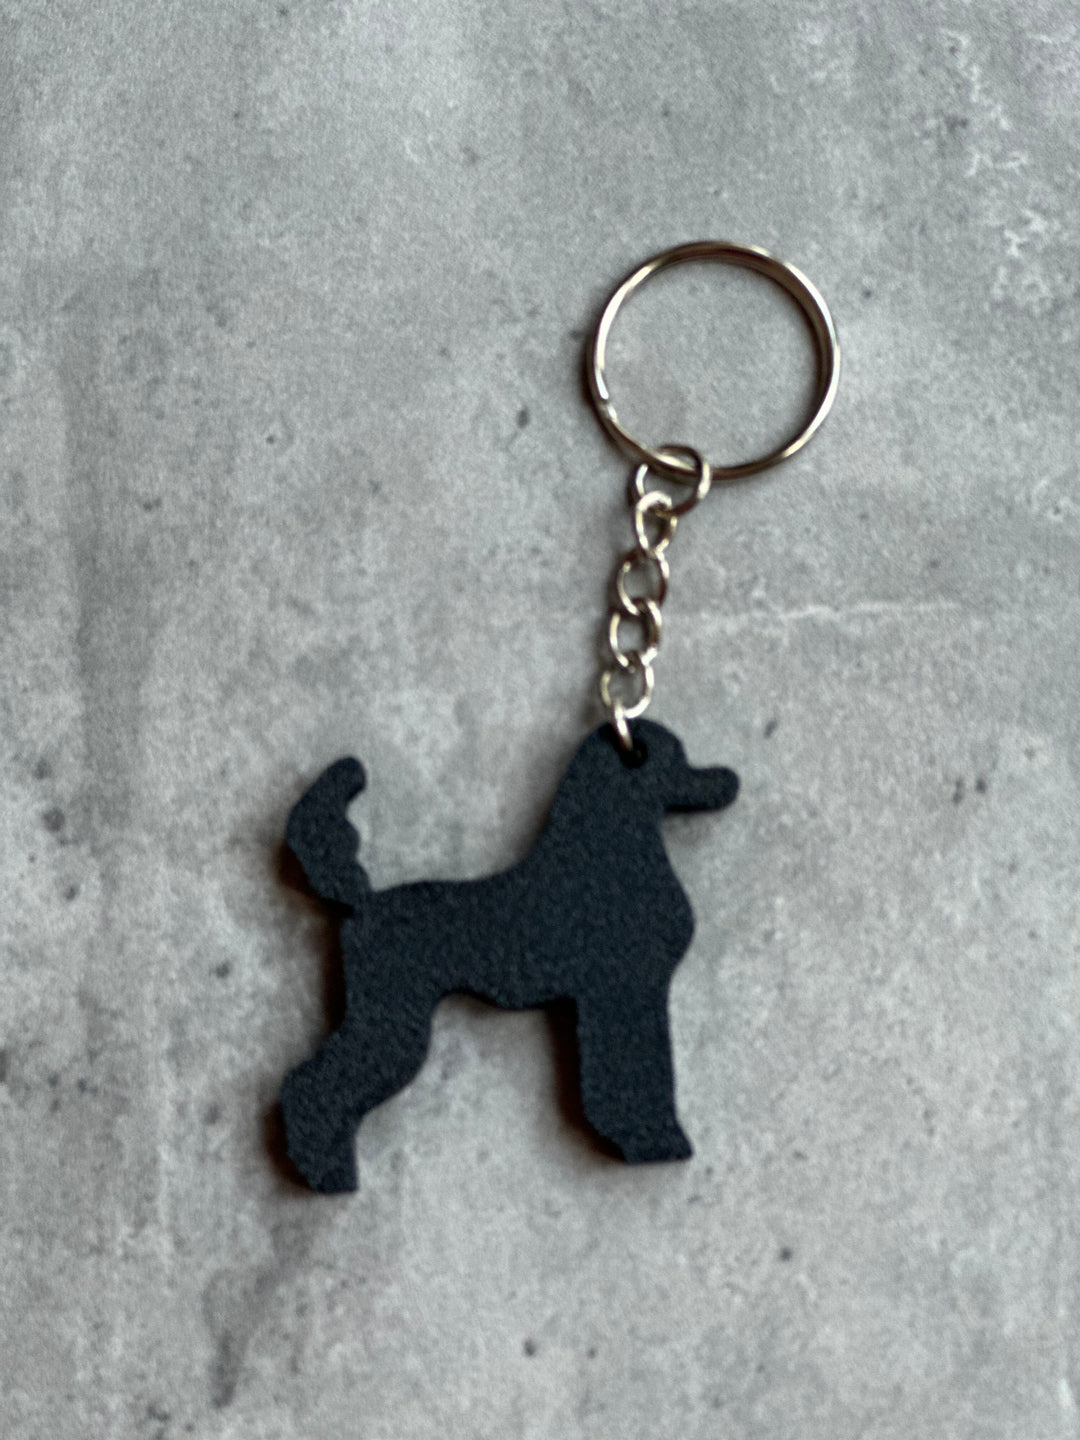 Poodle Keyring Stl File | 3D Printed | Unique Personalised Gifts